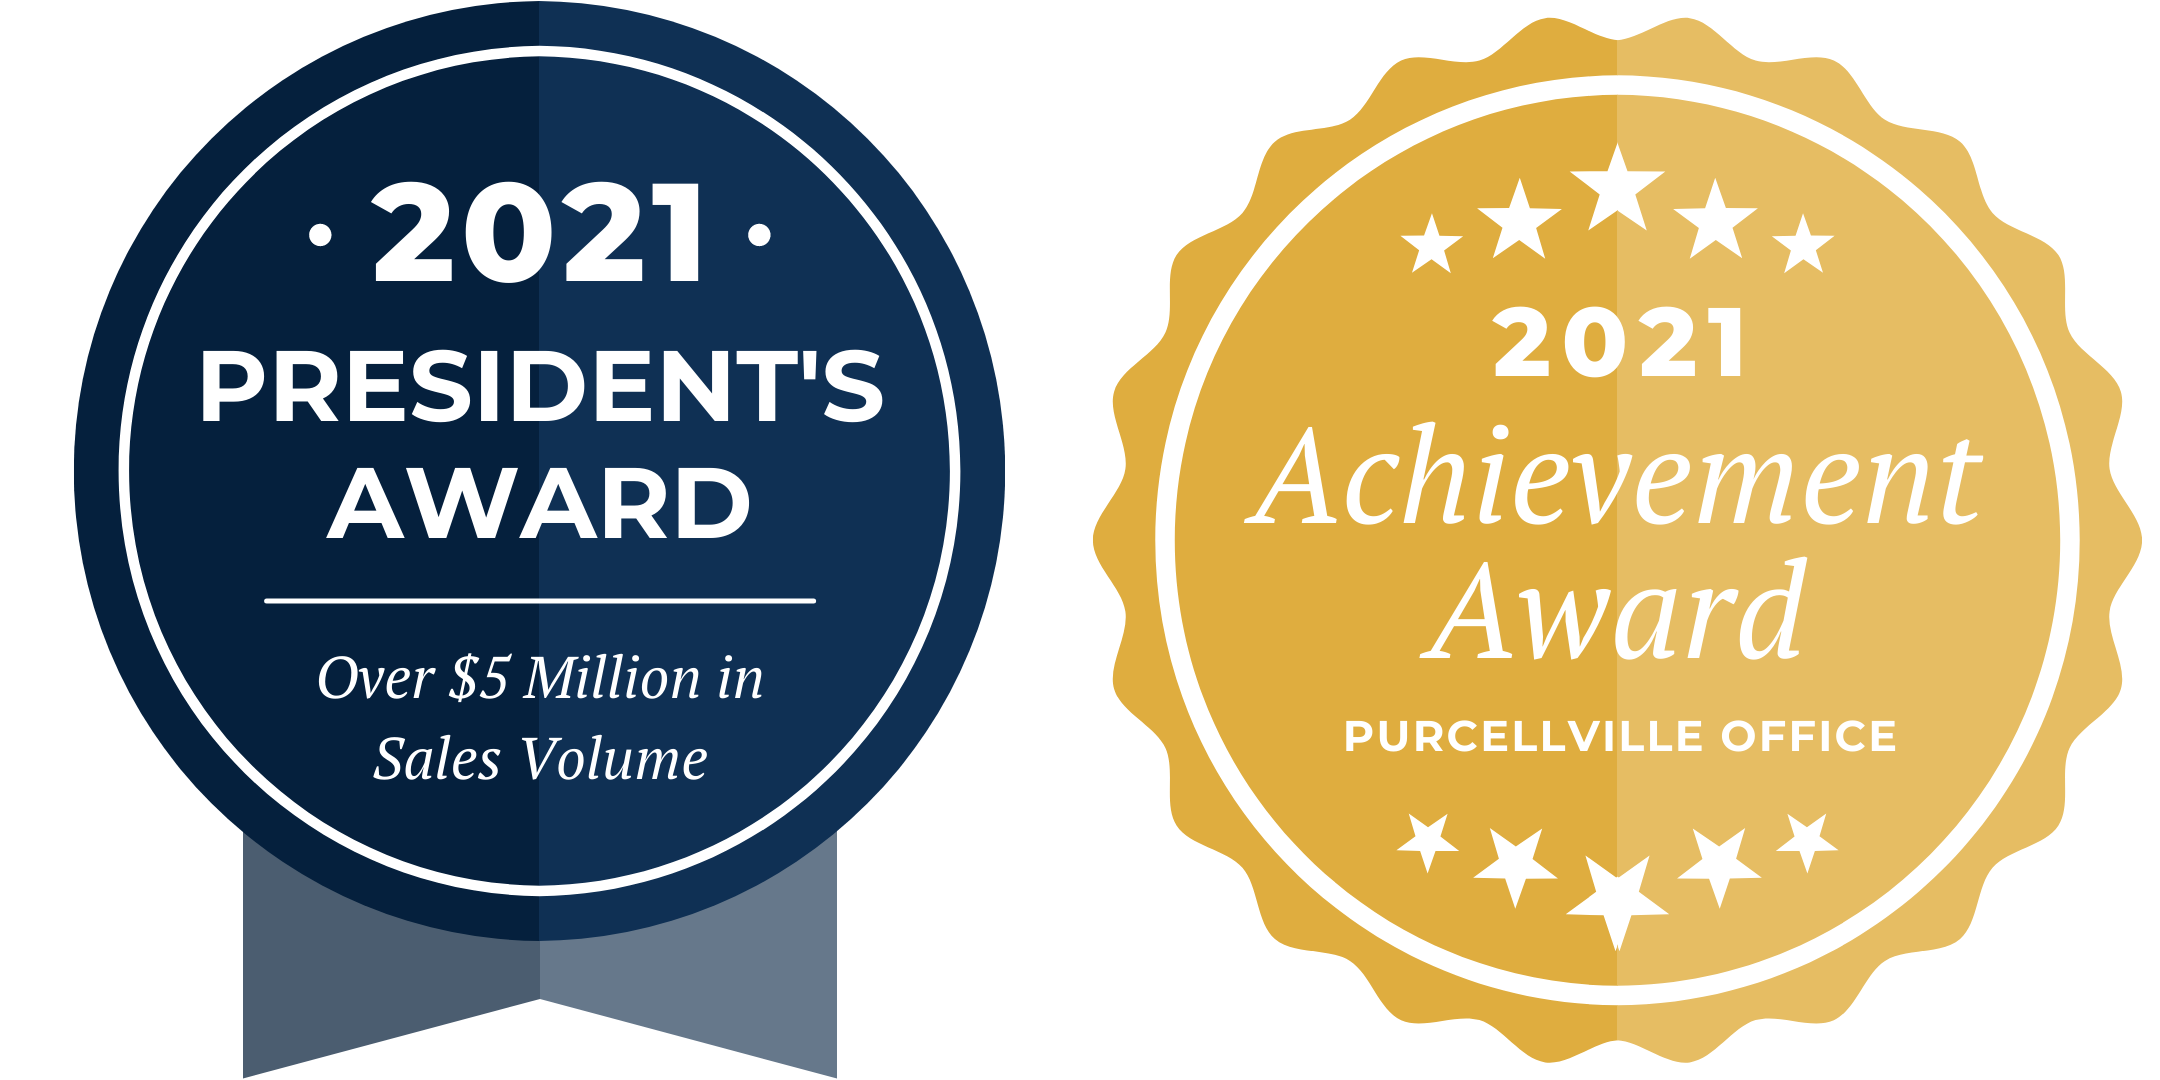 2021 President's Award and 2021 Achievement Award - Purcellville Office